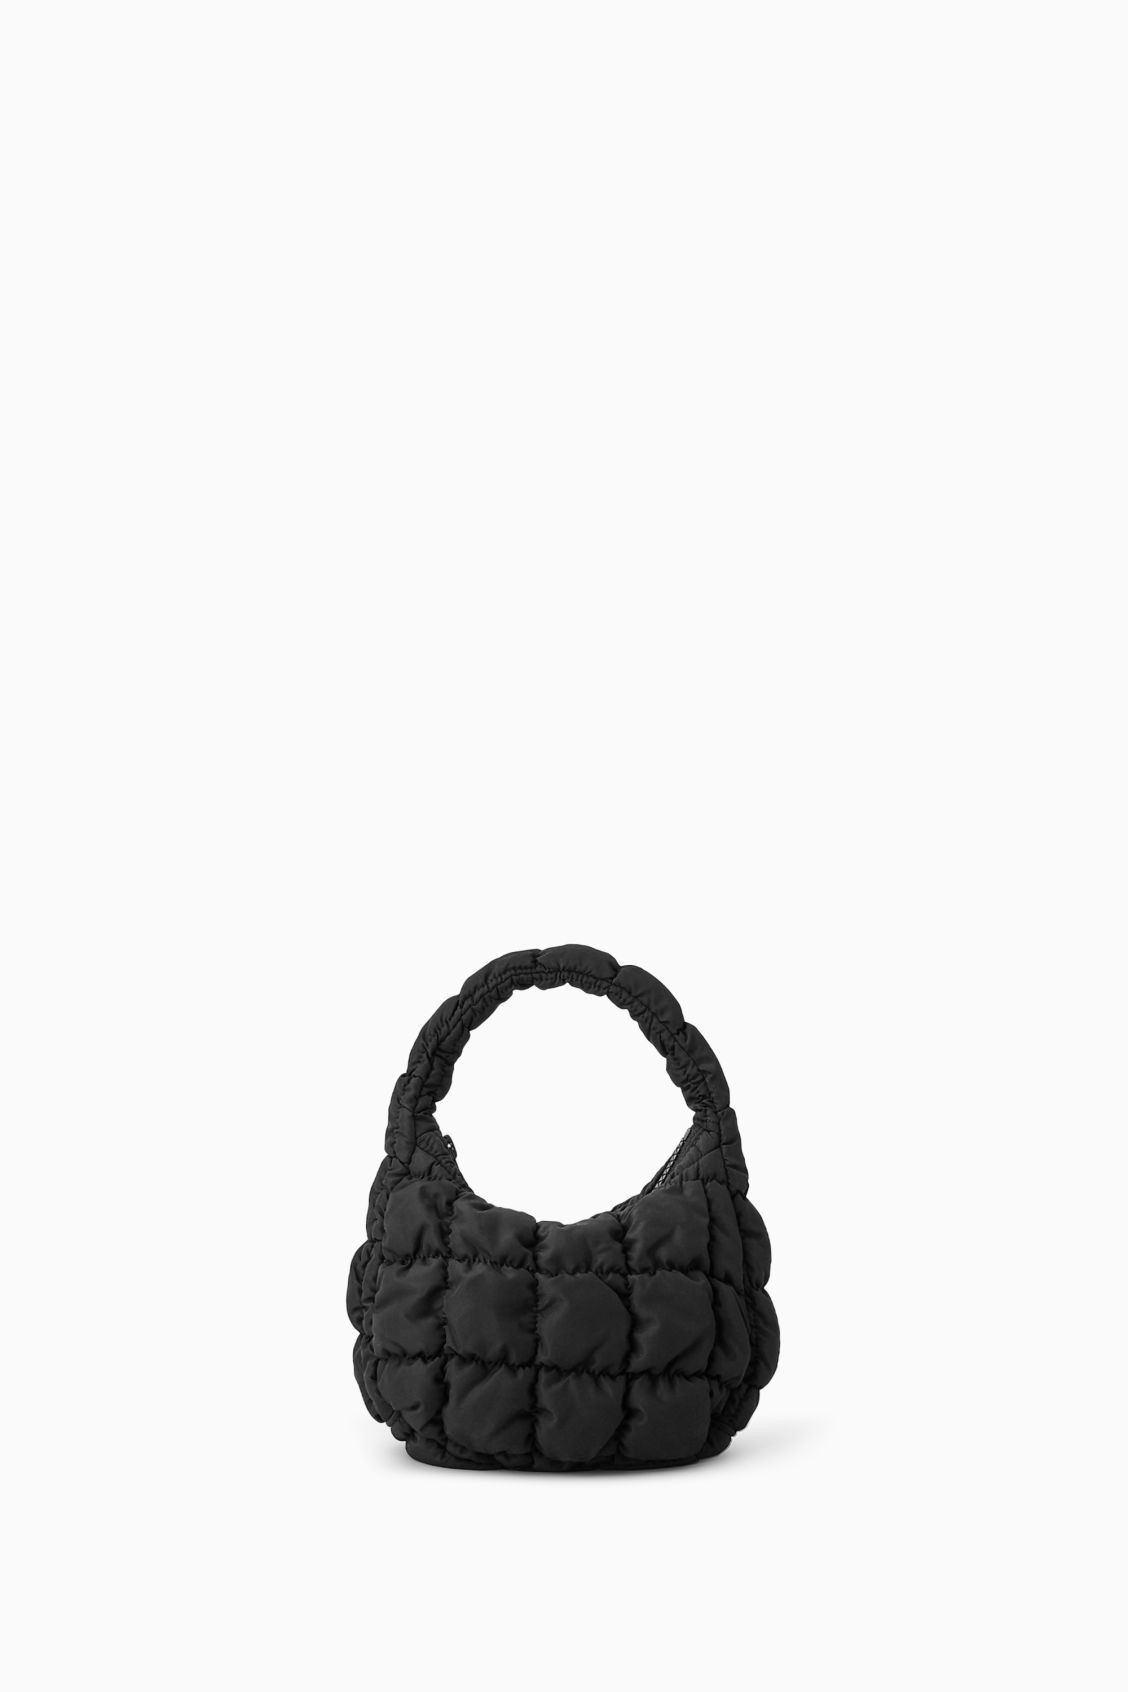 COS QUILTED BAG - BLACK - MICRO